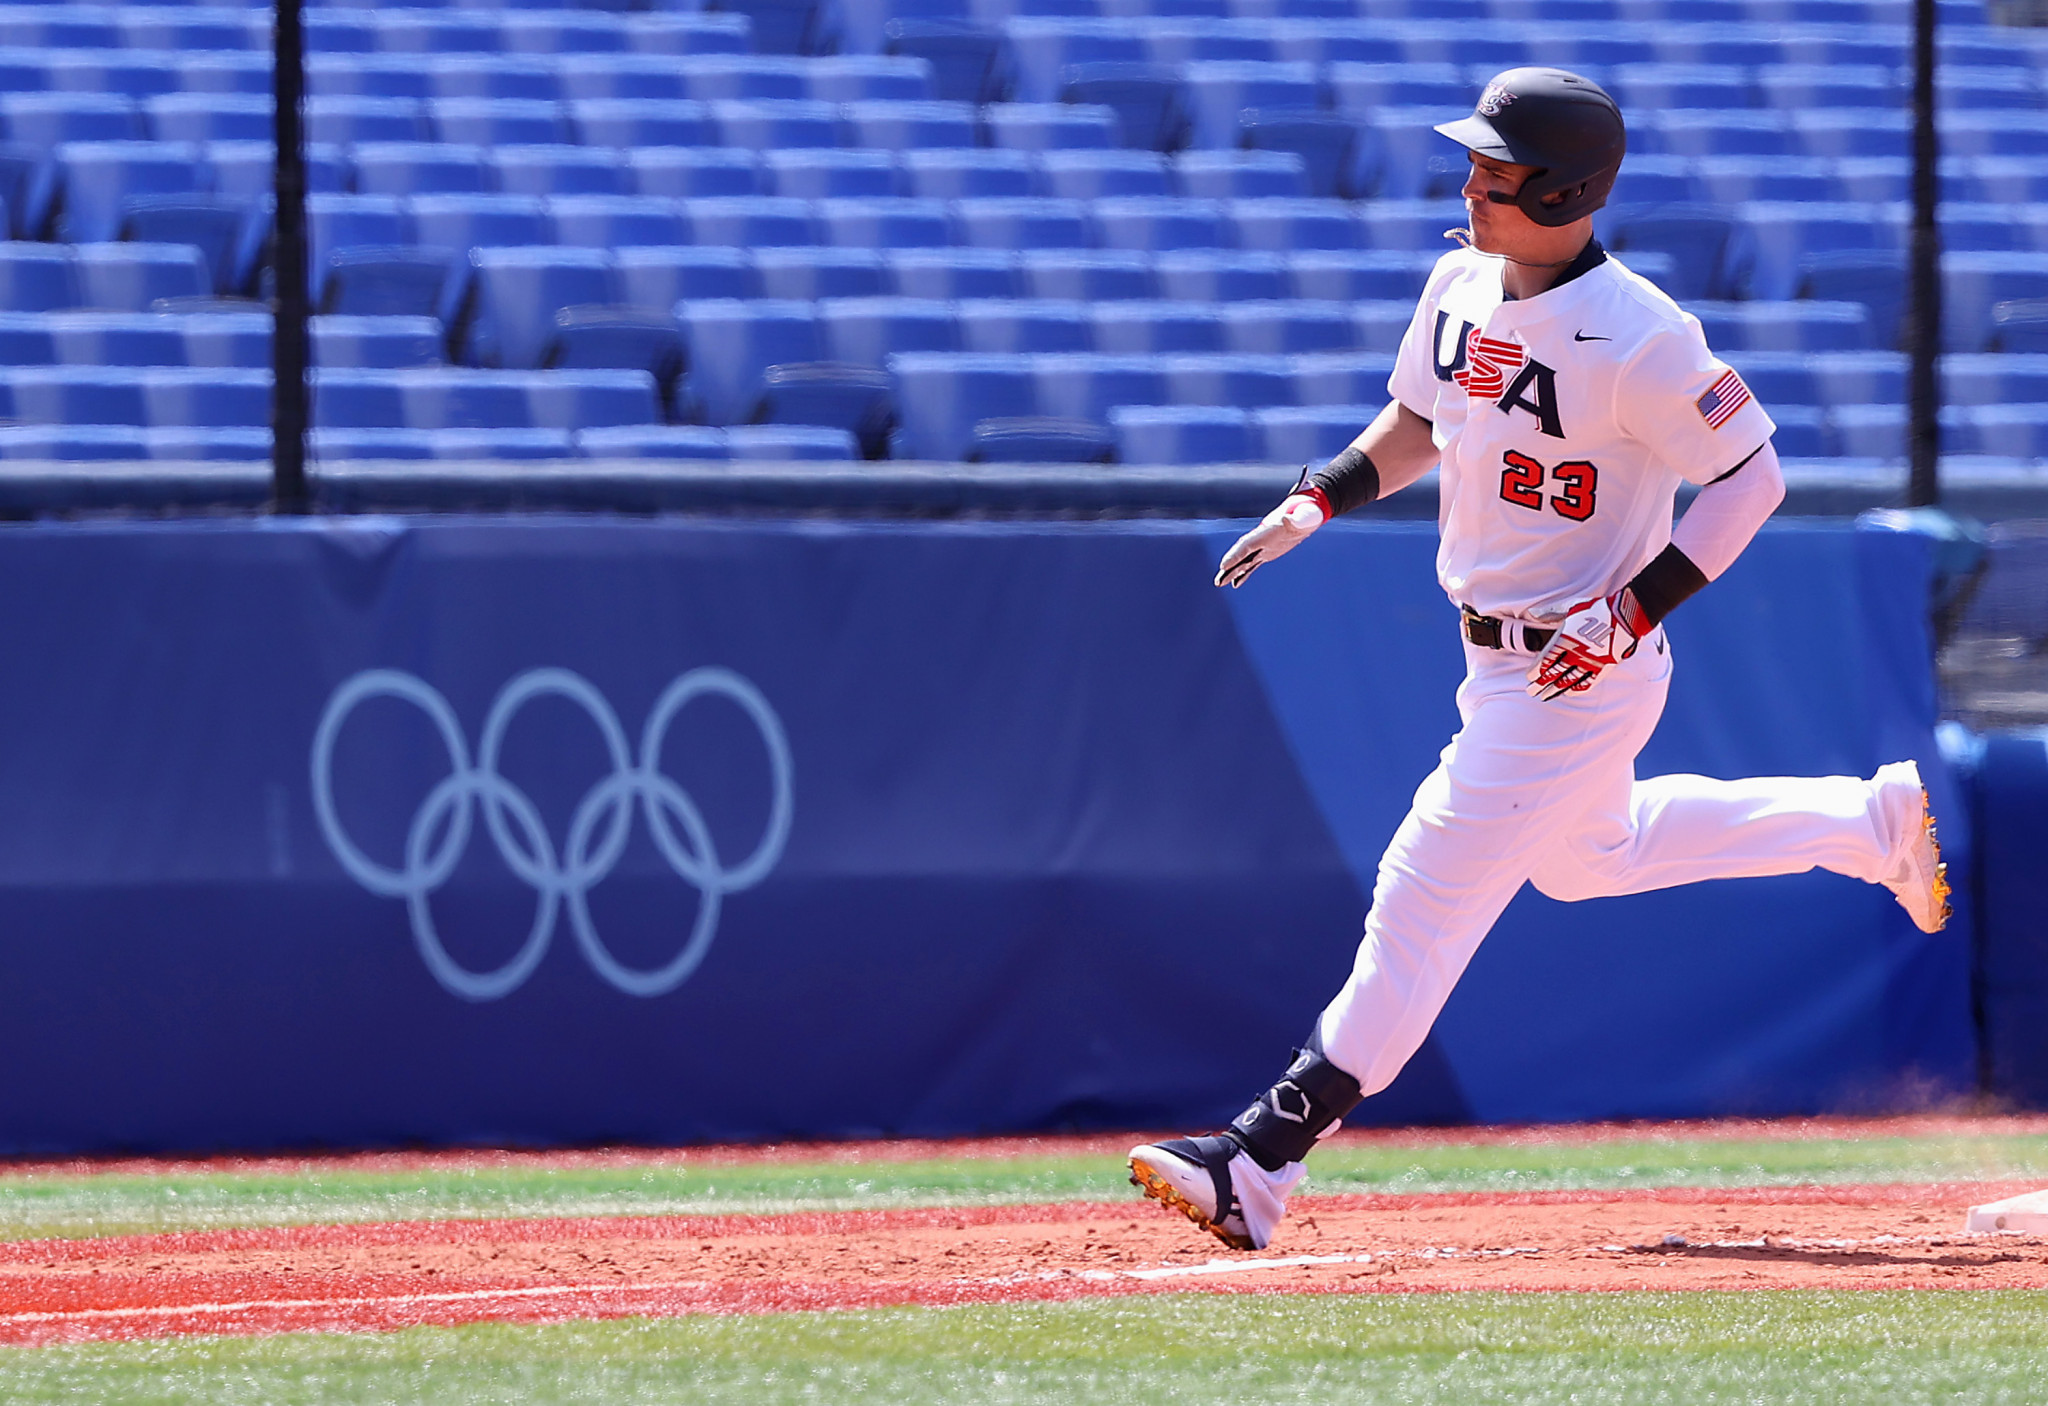 The WBSC is seeking to ensure baseball's seventh appearance as an Olympic medal event at Los Angeles 2028 ©Getty Images